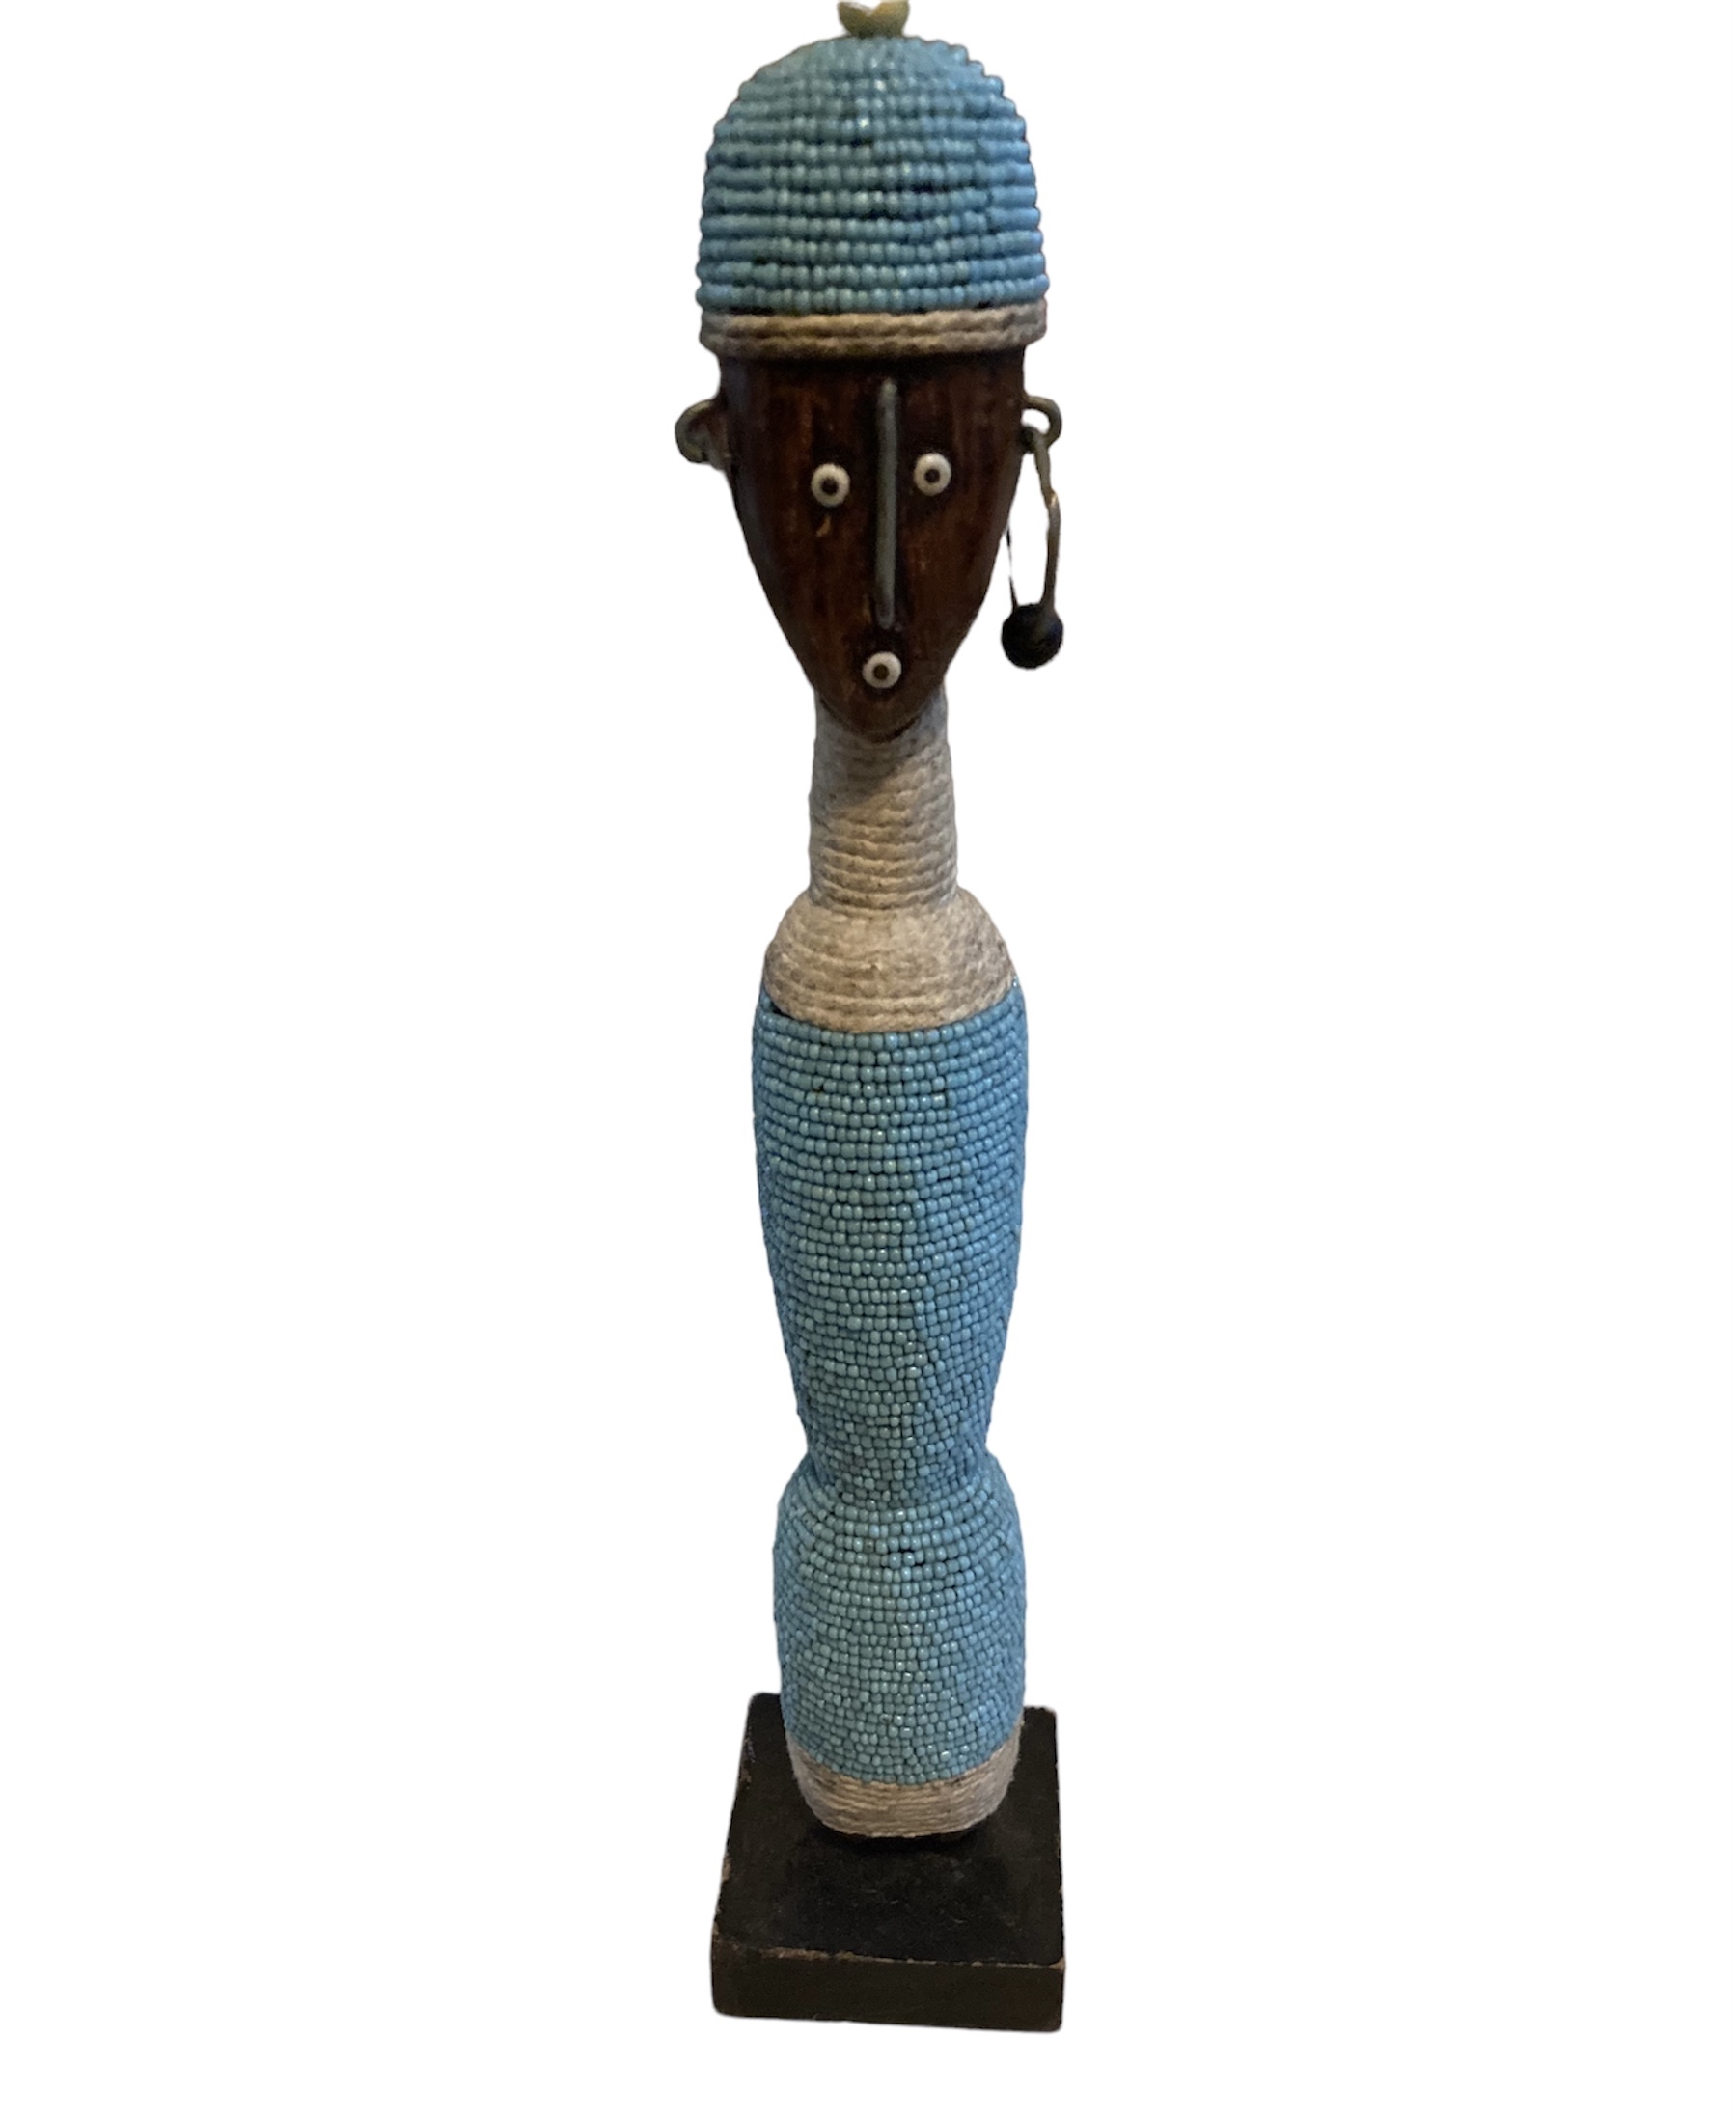 Namji Doll from Cameroon - Large - 008